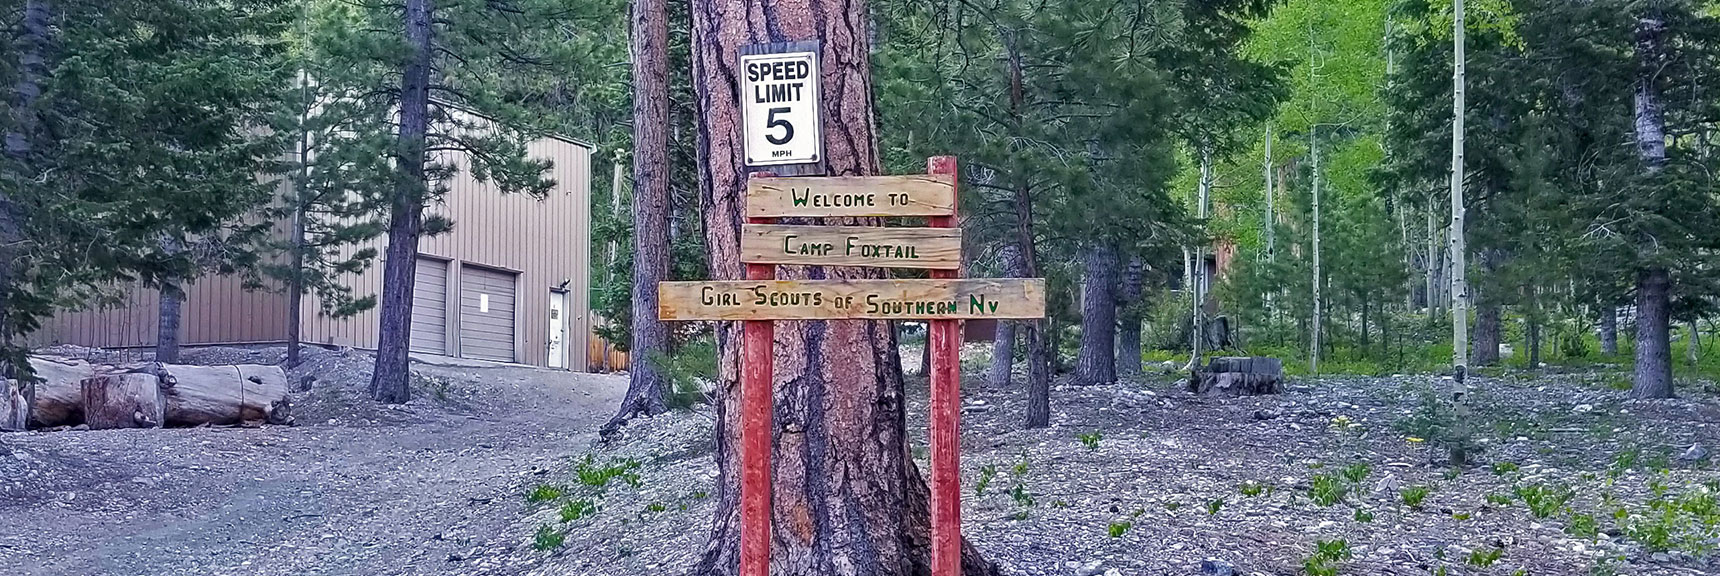 Original Sign at Entrance to "Camp Foxtail Girl Scouts Camp". Abandoned After Water Regulation Issues. | Lee to Kyle Canyon | Foxtail Approach | Mt Charleston Wilderness | Spring Mountains, Nevada